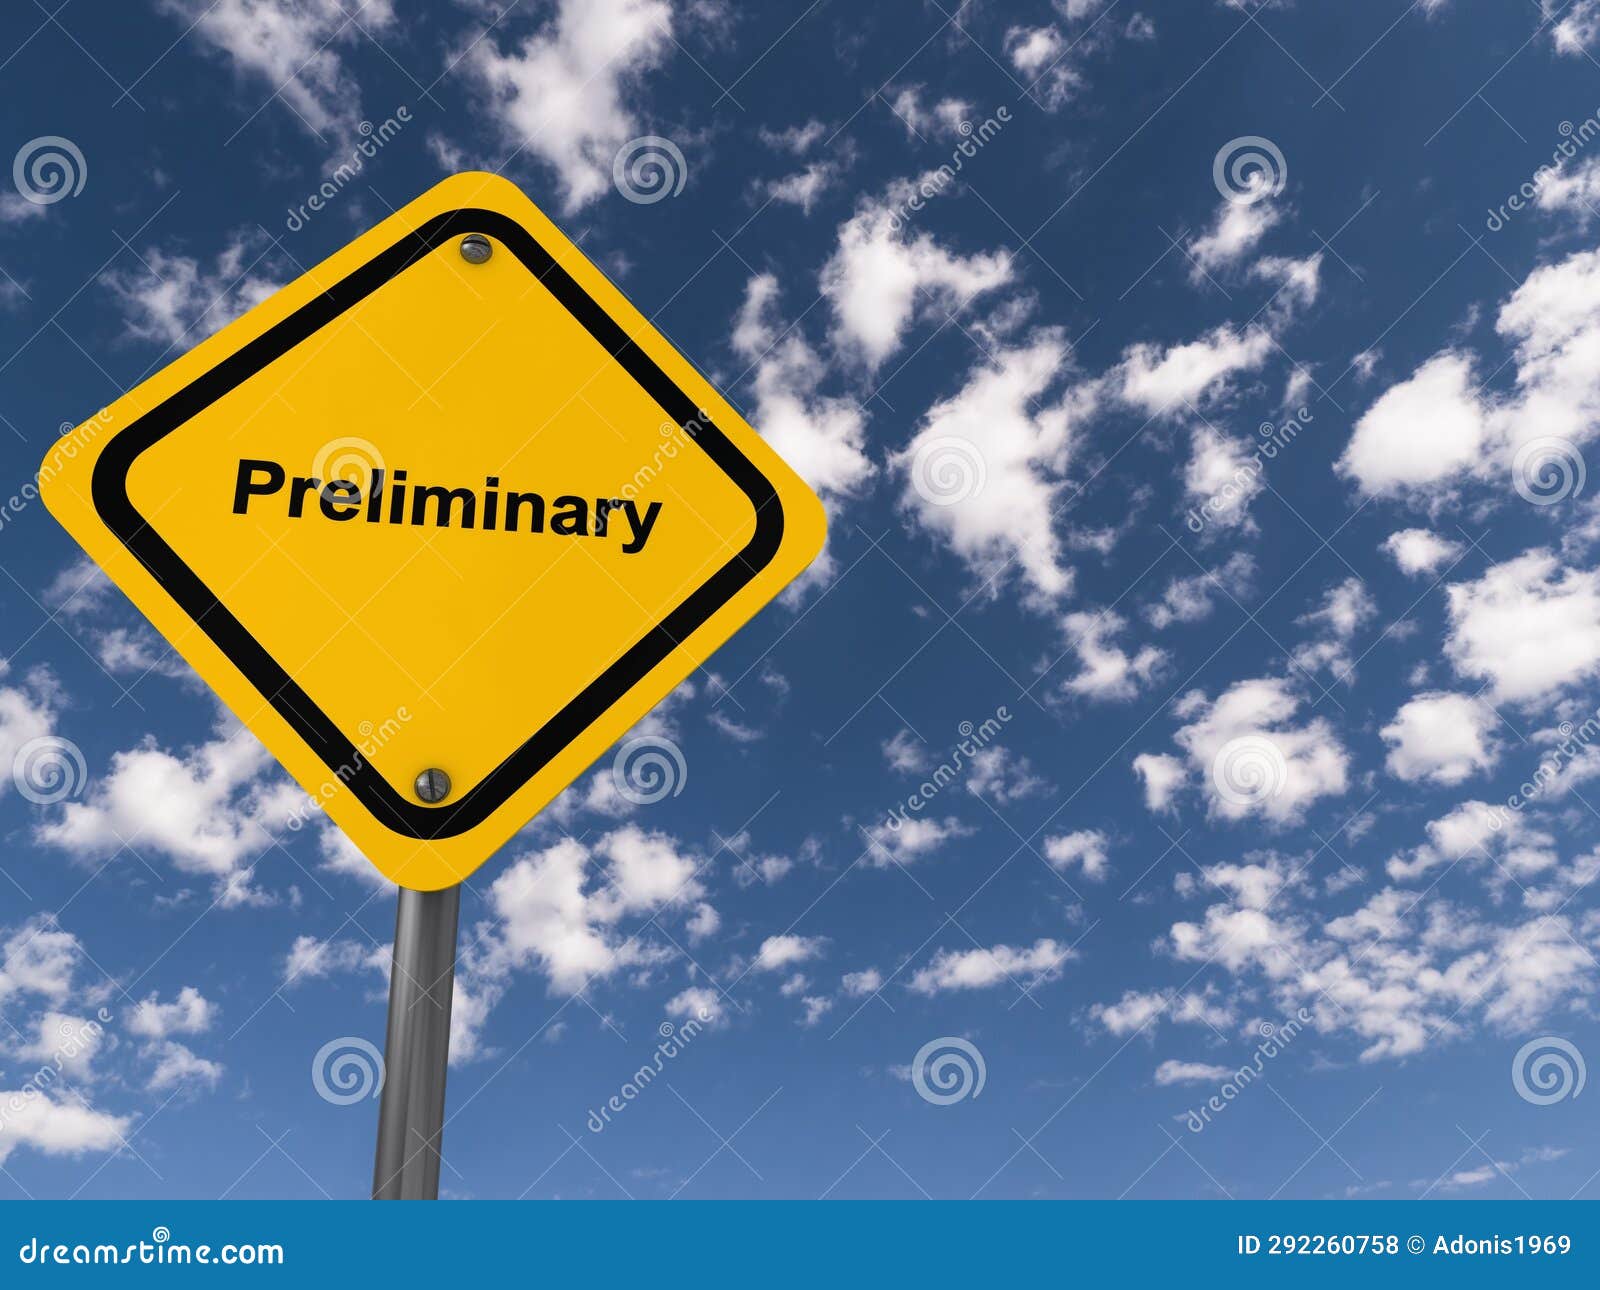 preliminary traffic sign on blue sky